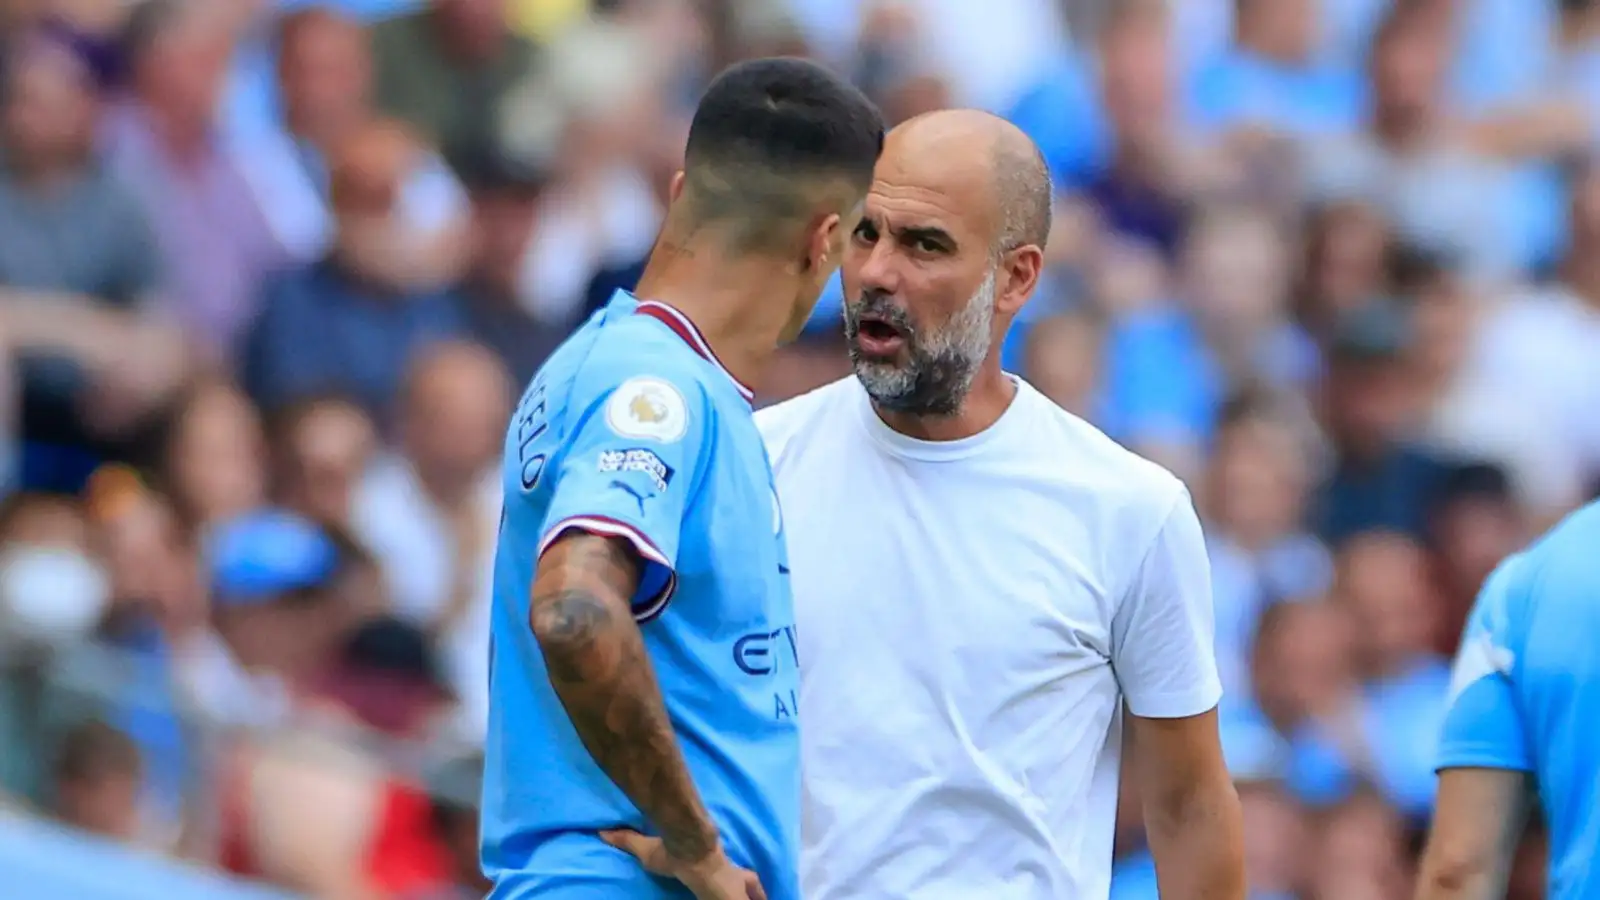 Guardiola bust-up with Cancelo